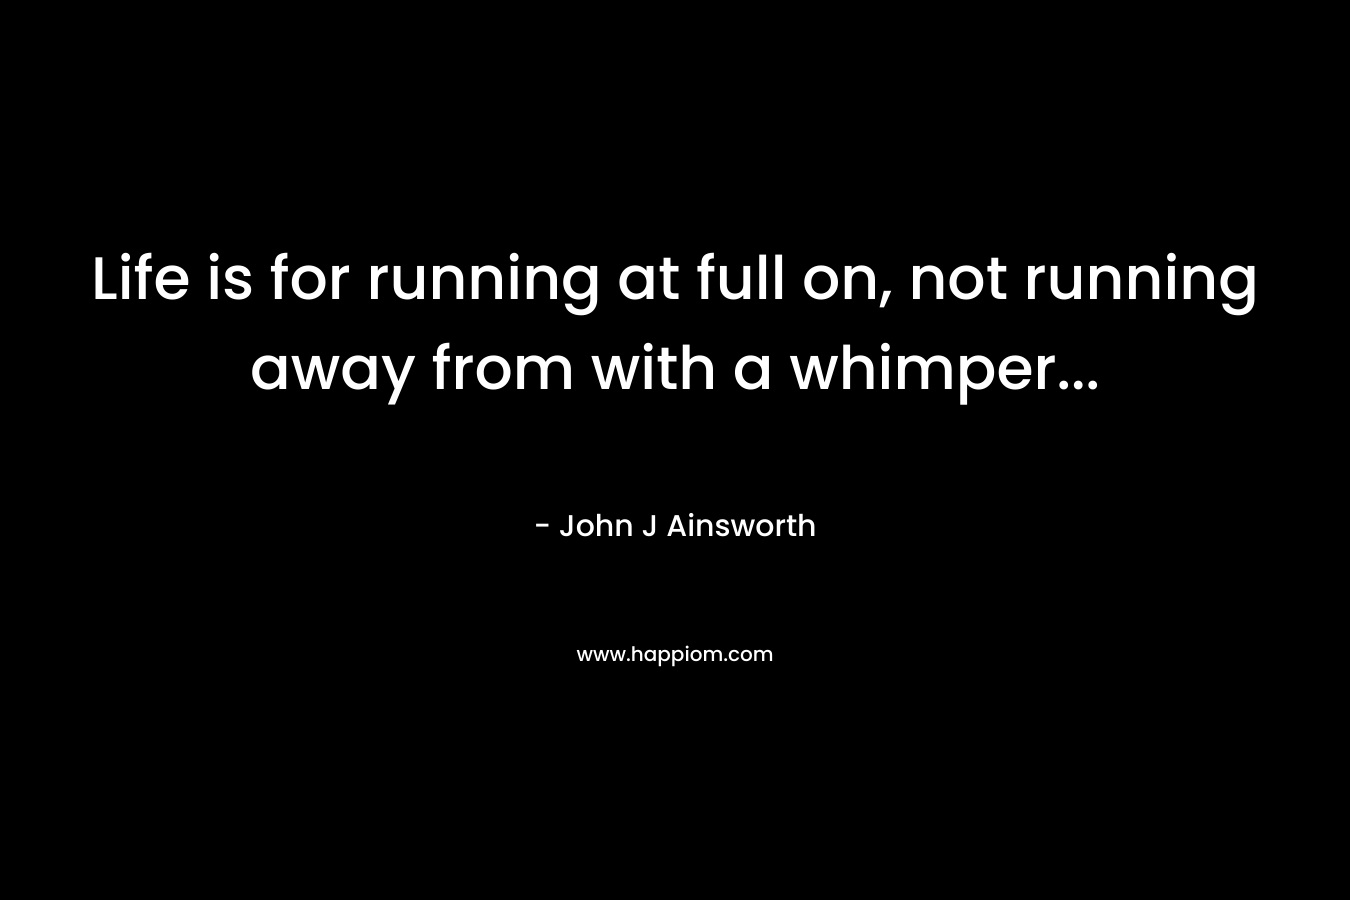 Life is for running at full on, not running away from with a whimper...